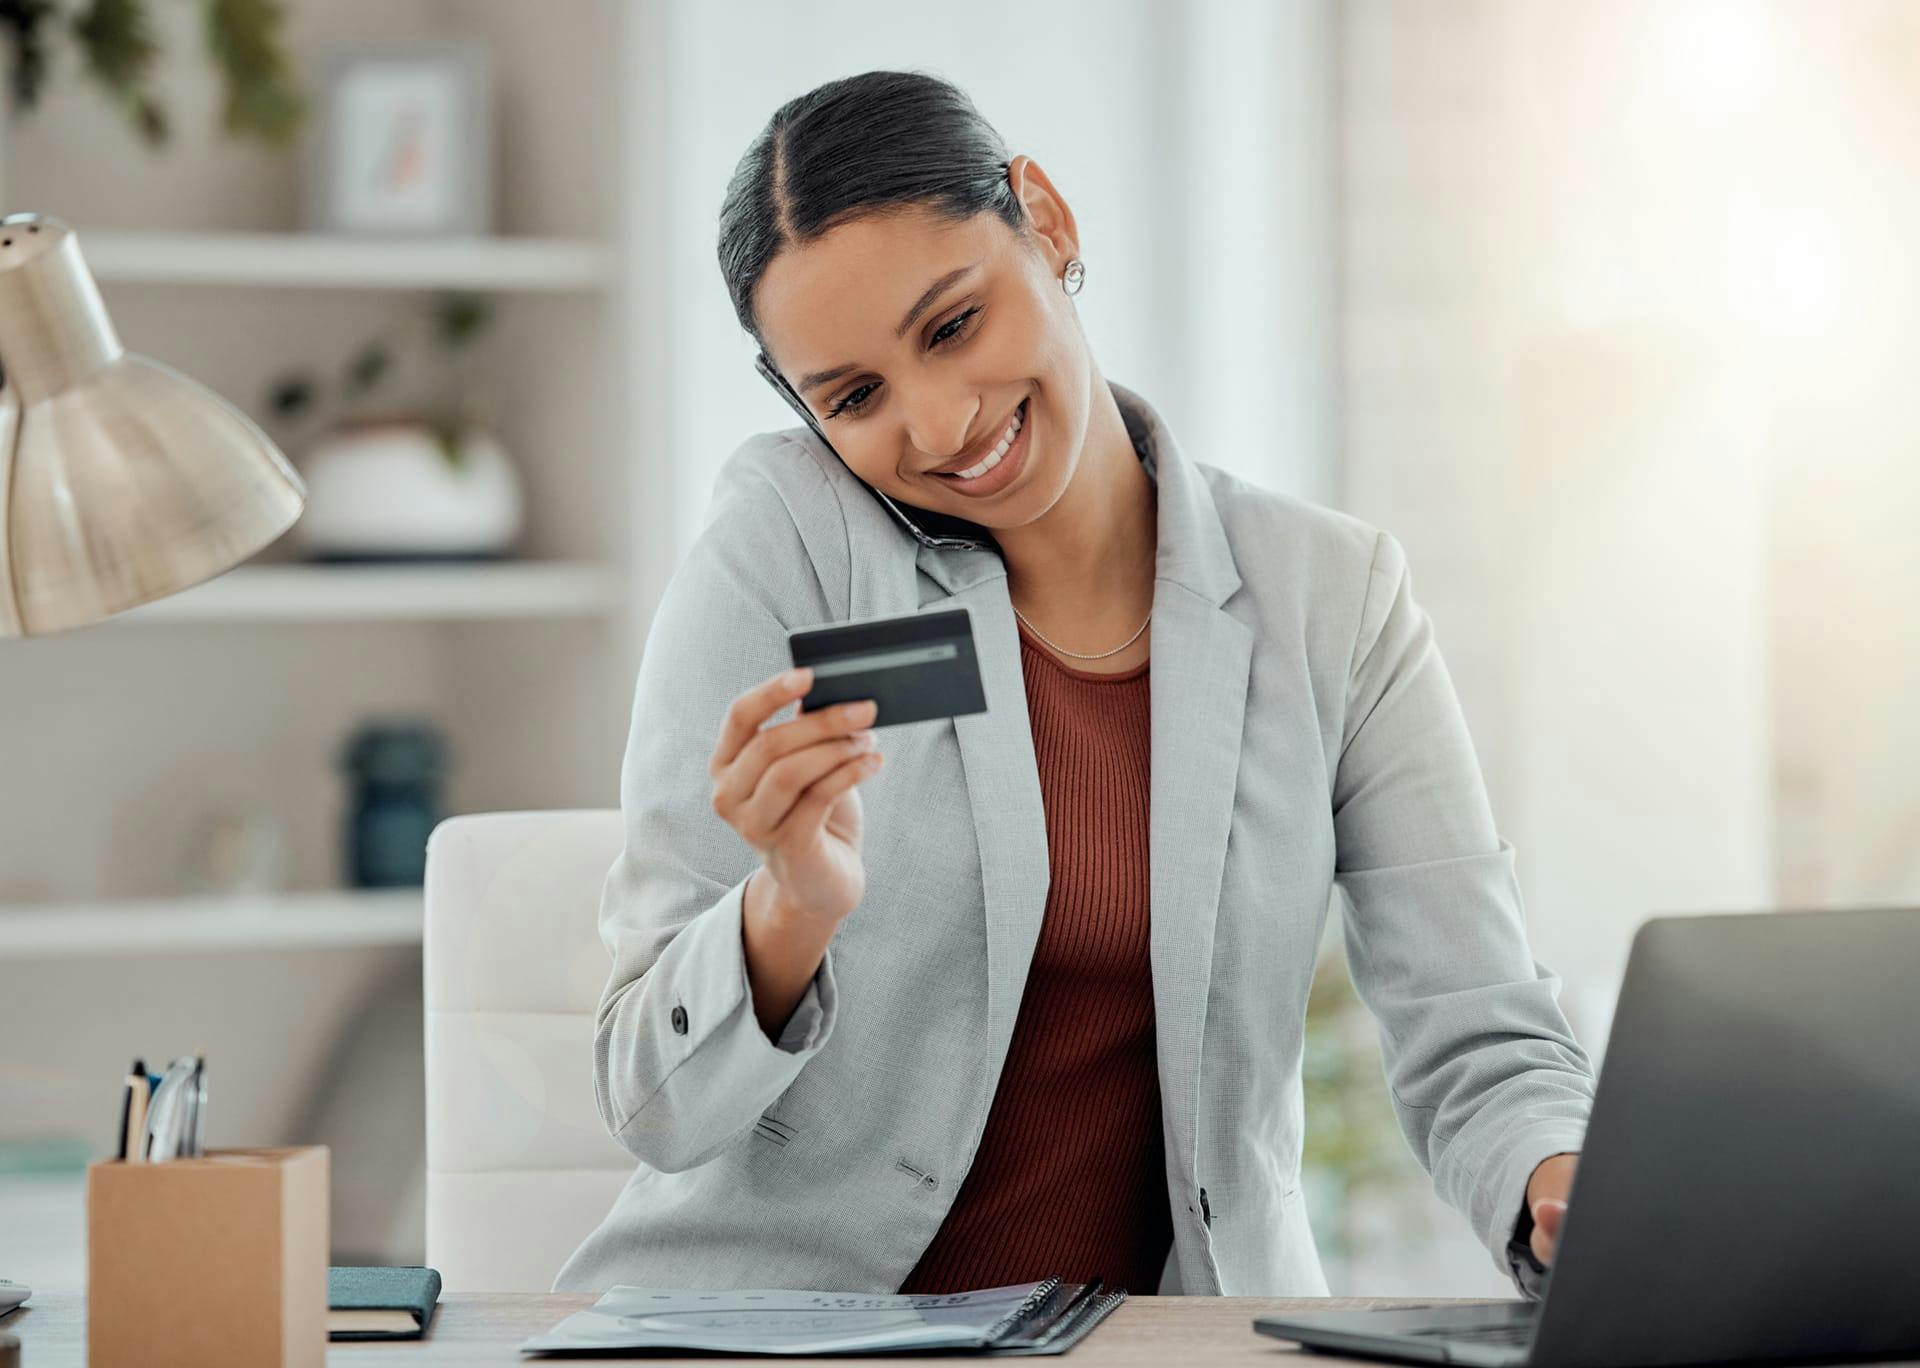 Woman smiling while on the phone looking at credit card